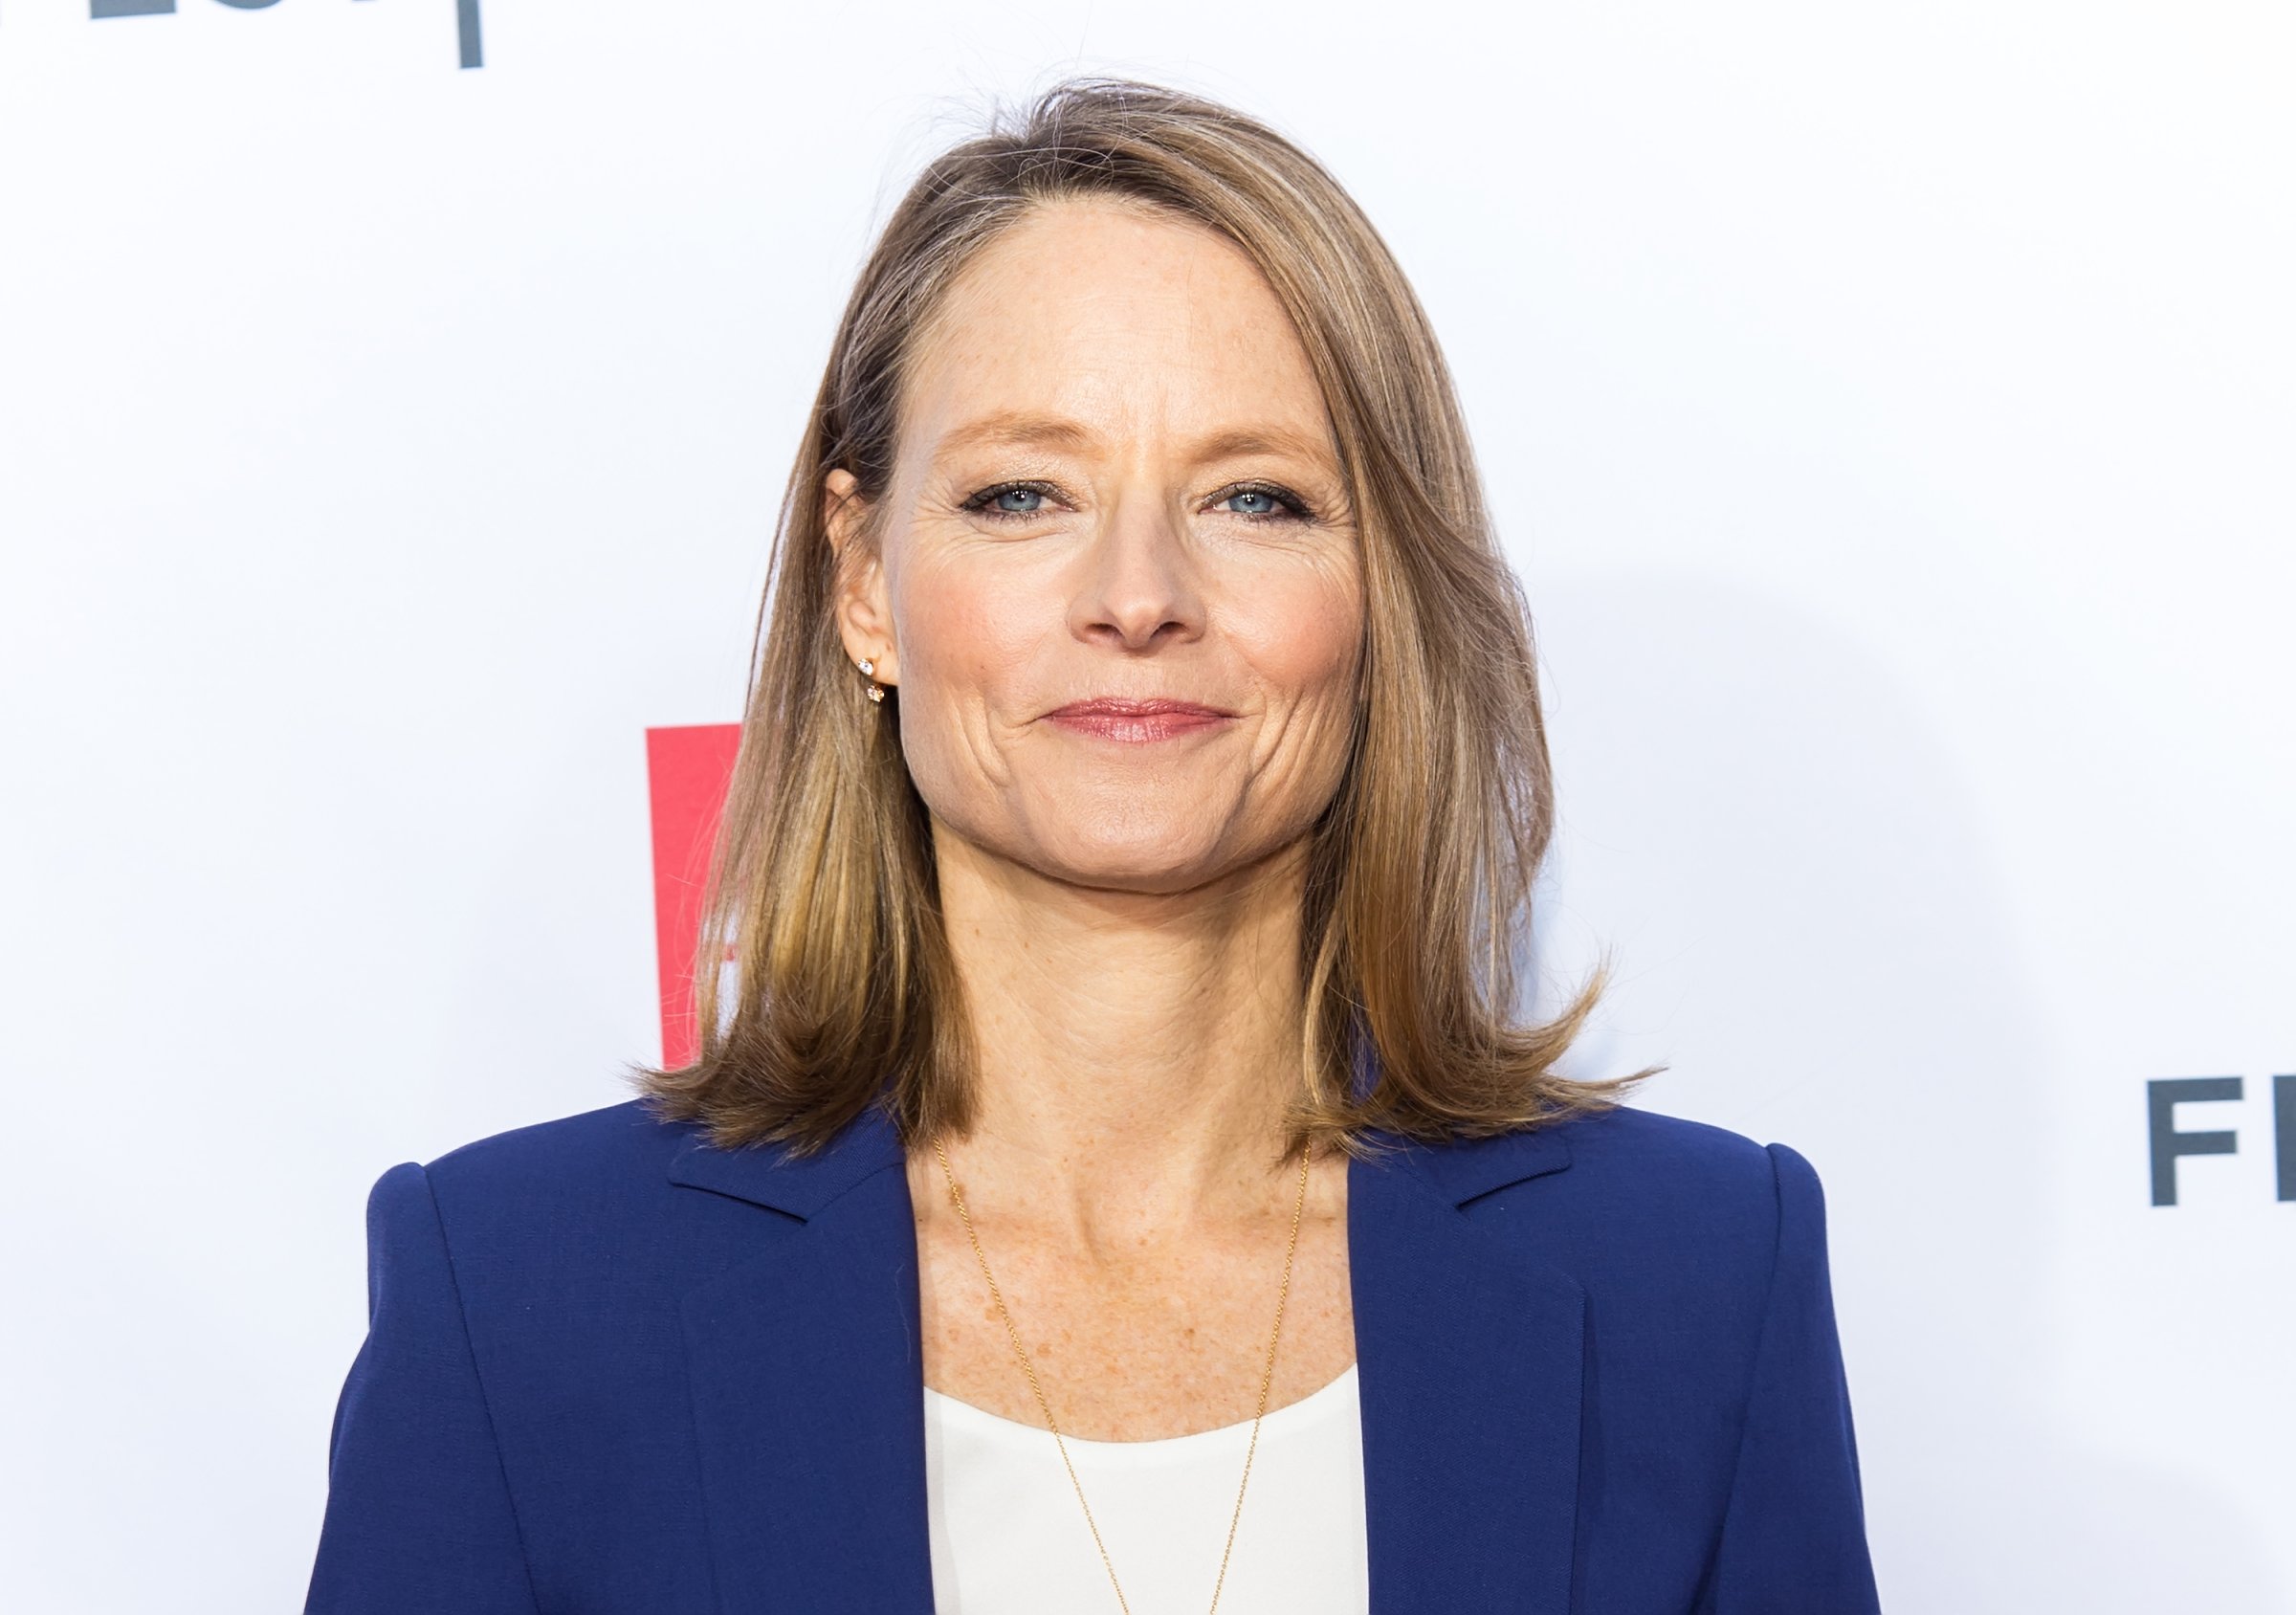 Actress, director, and producer, Jodie Foster attends 'Taxi Driver' 40th Anniversary Celebration during 2016 Tribeca Film Festival at The Beacon Theatre on April 21, 2016 in New York City.